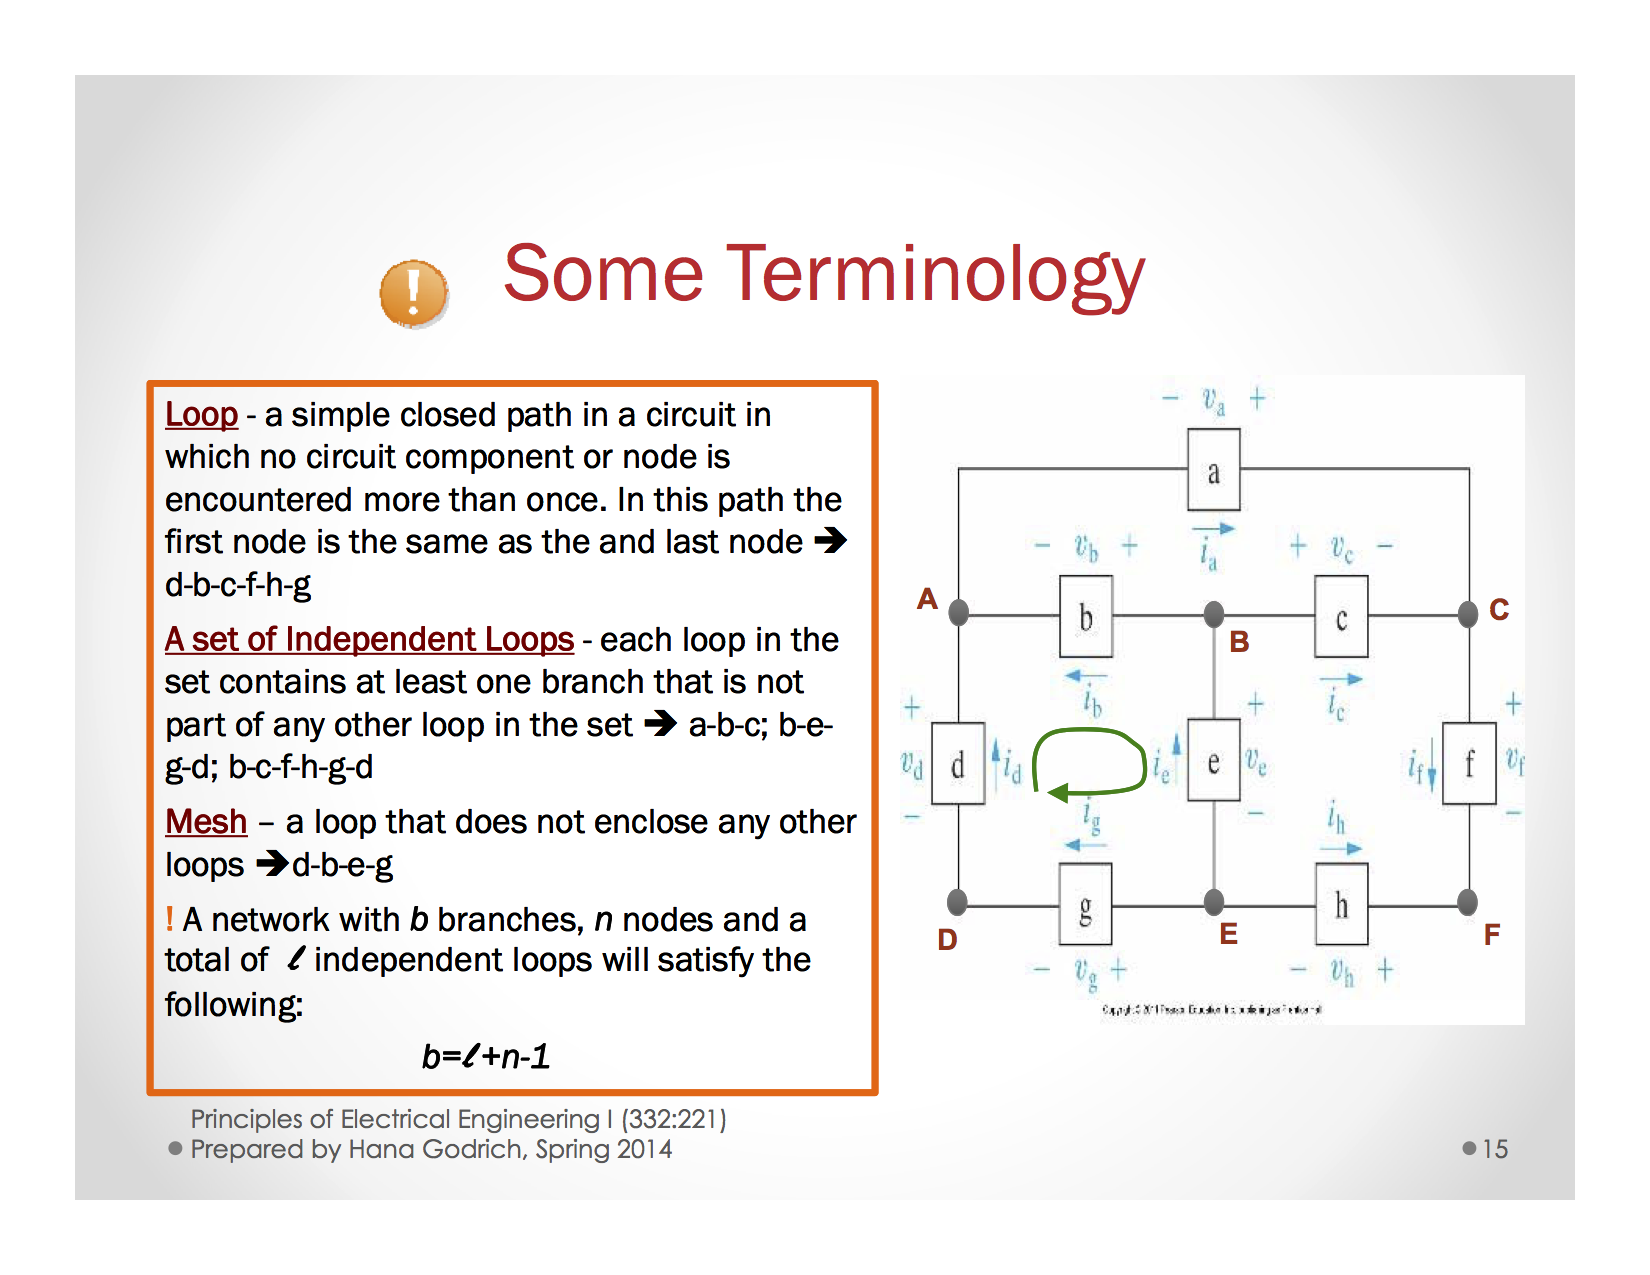 Circuit and definitions slide